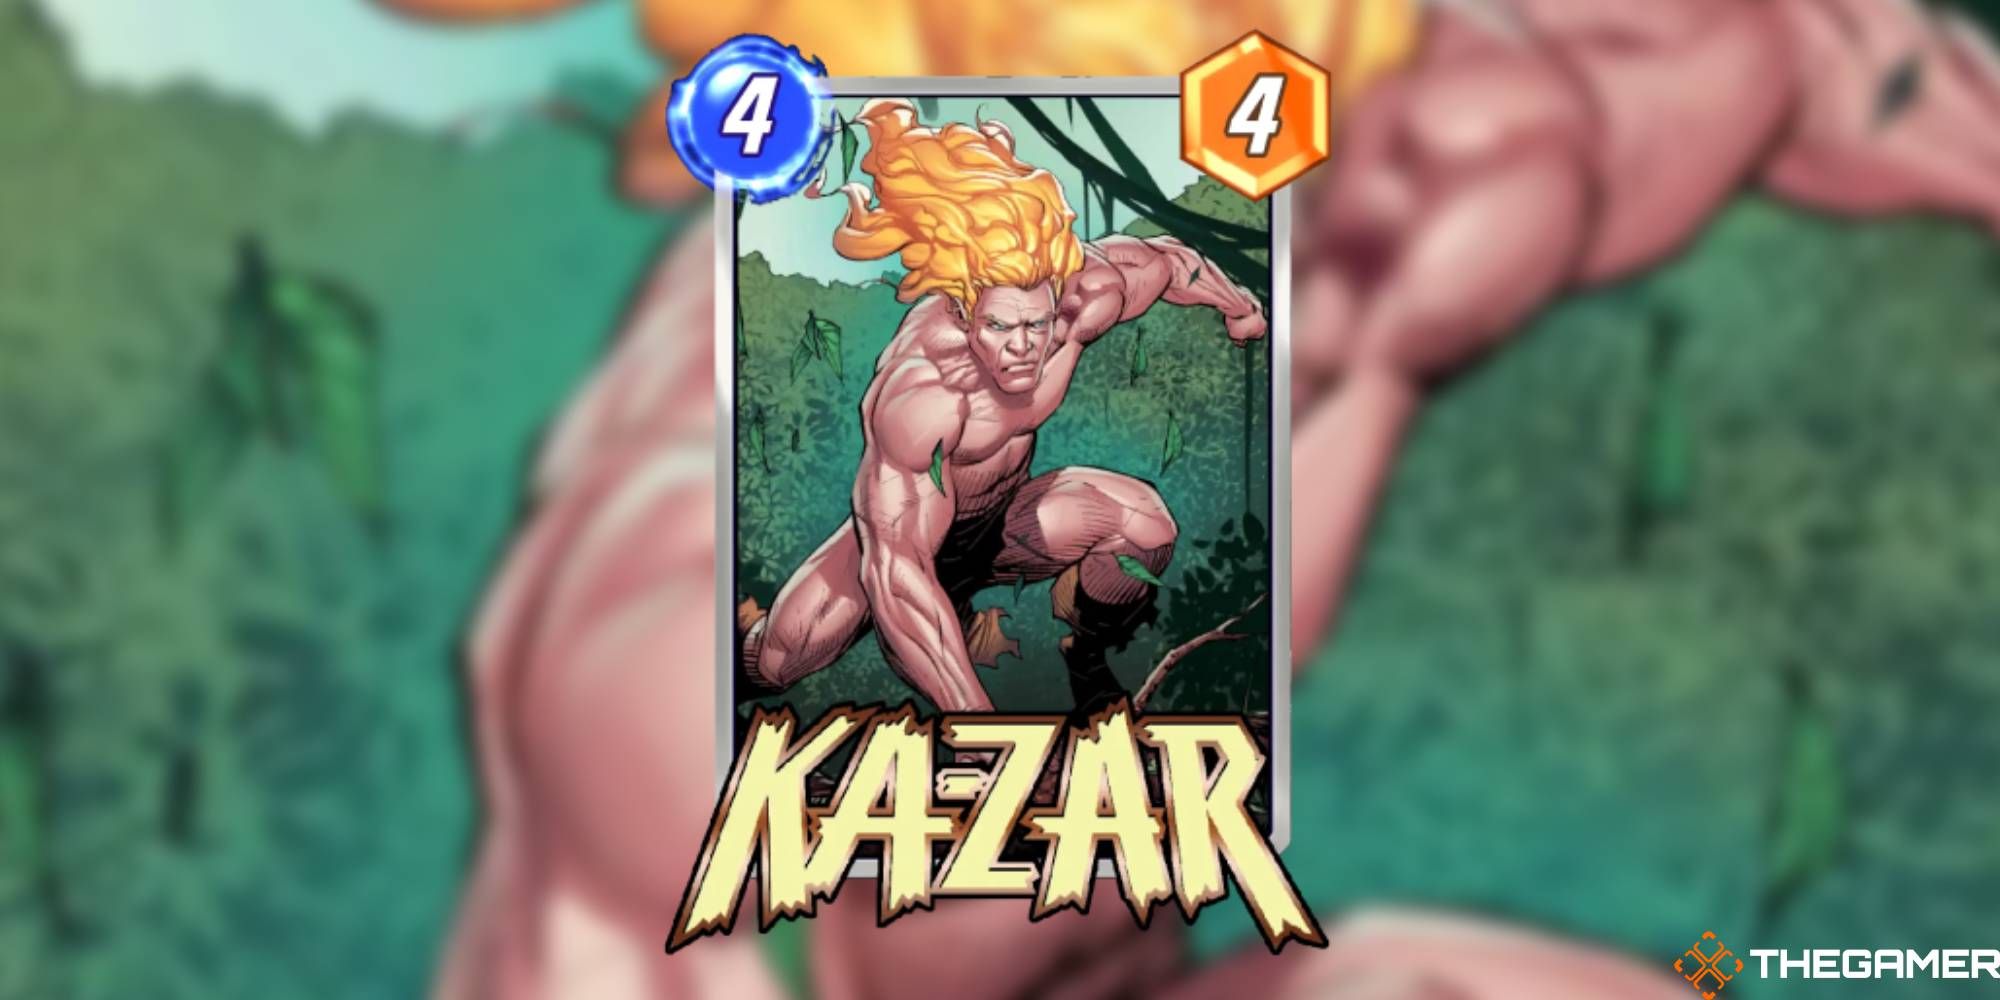 Kazar from Marvel Snap, Base Variant, looking determined while on one knee